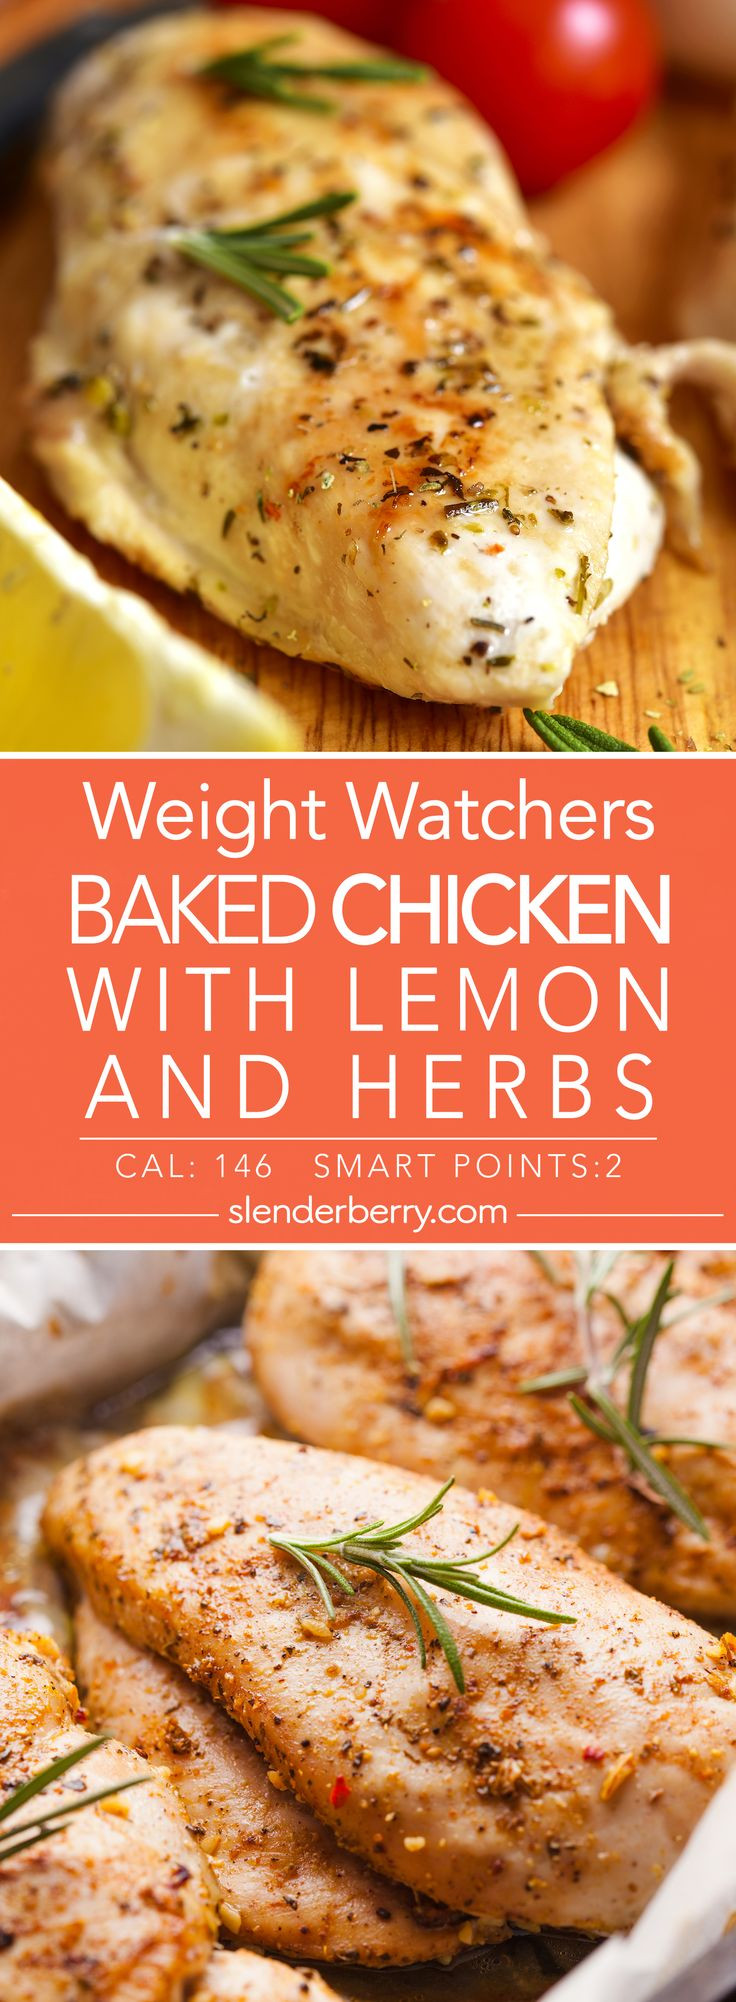 Weight Watchers Baked Chicken Recipes
 best images about Weight Watchers & Healthy Recipes